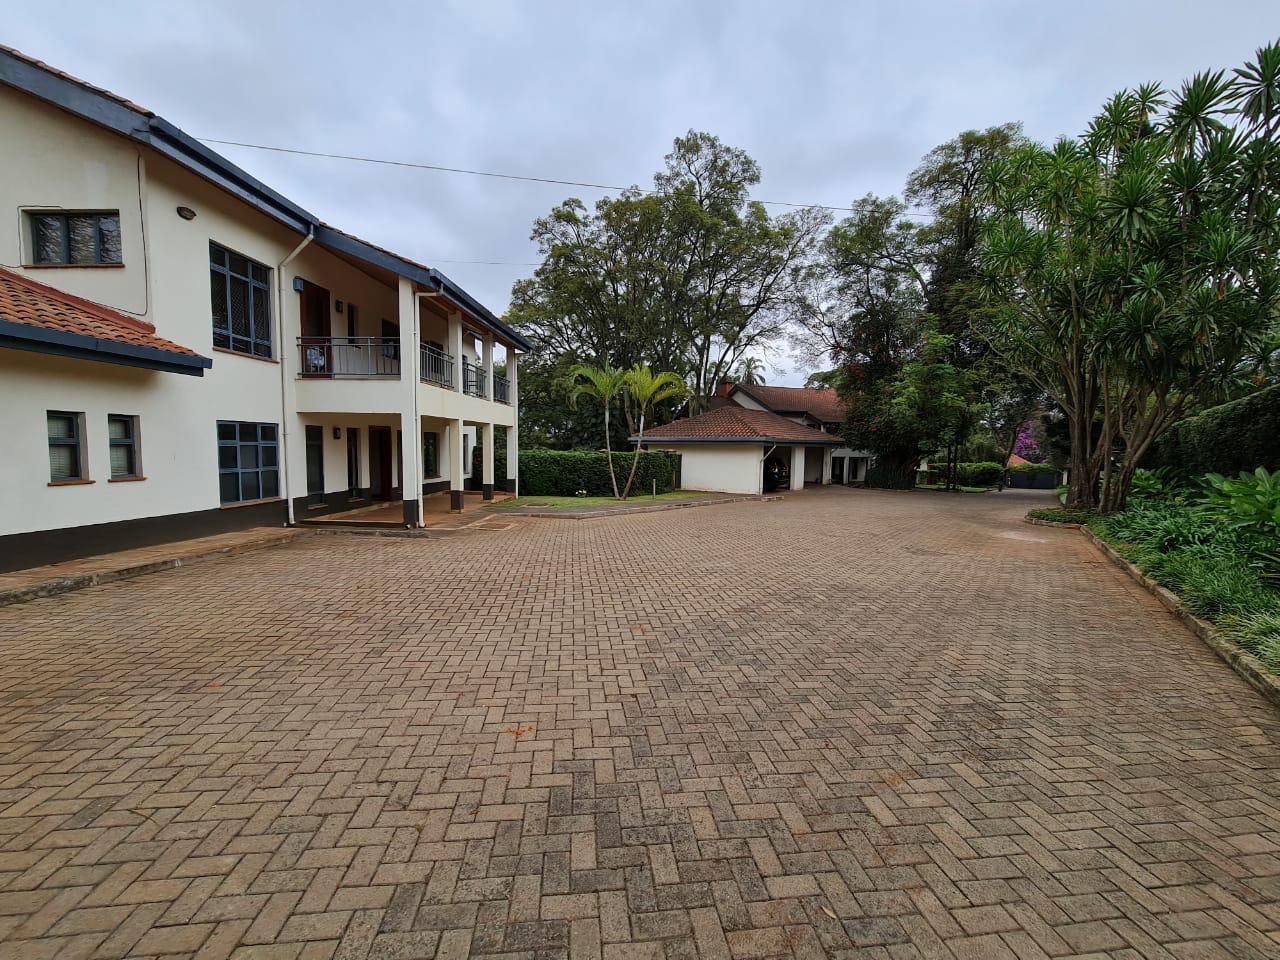 Lovely 4 bedroom Townhouse plus dsq for rent at Ksh330k in Westlands, ensuite, family room, office, detached dsq for 2, very well maintained and more amenities23